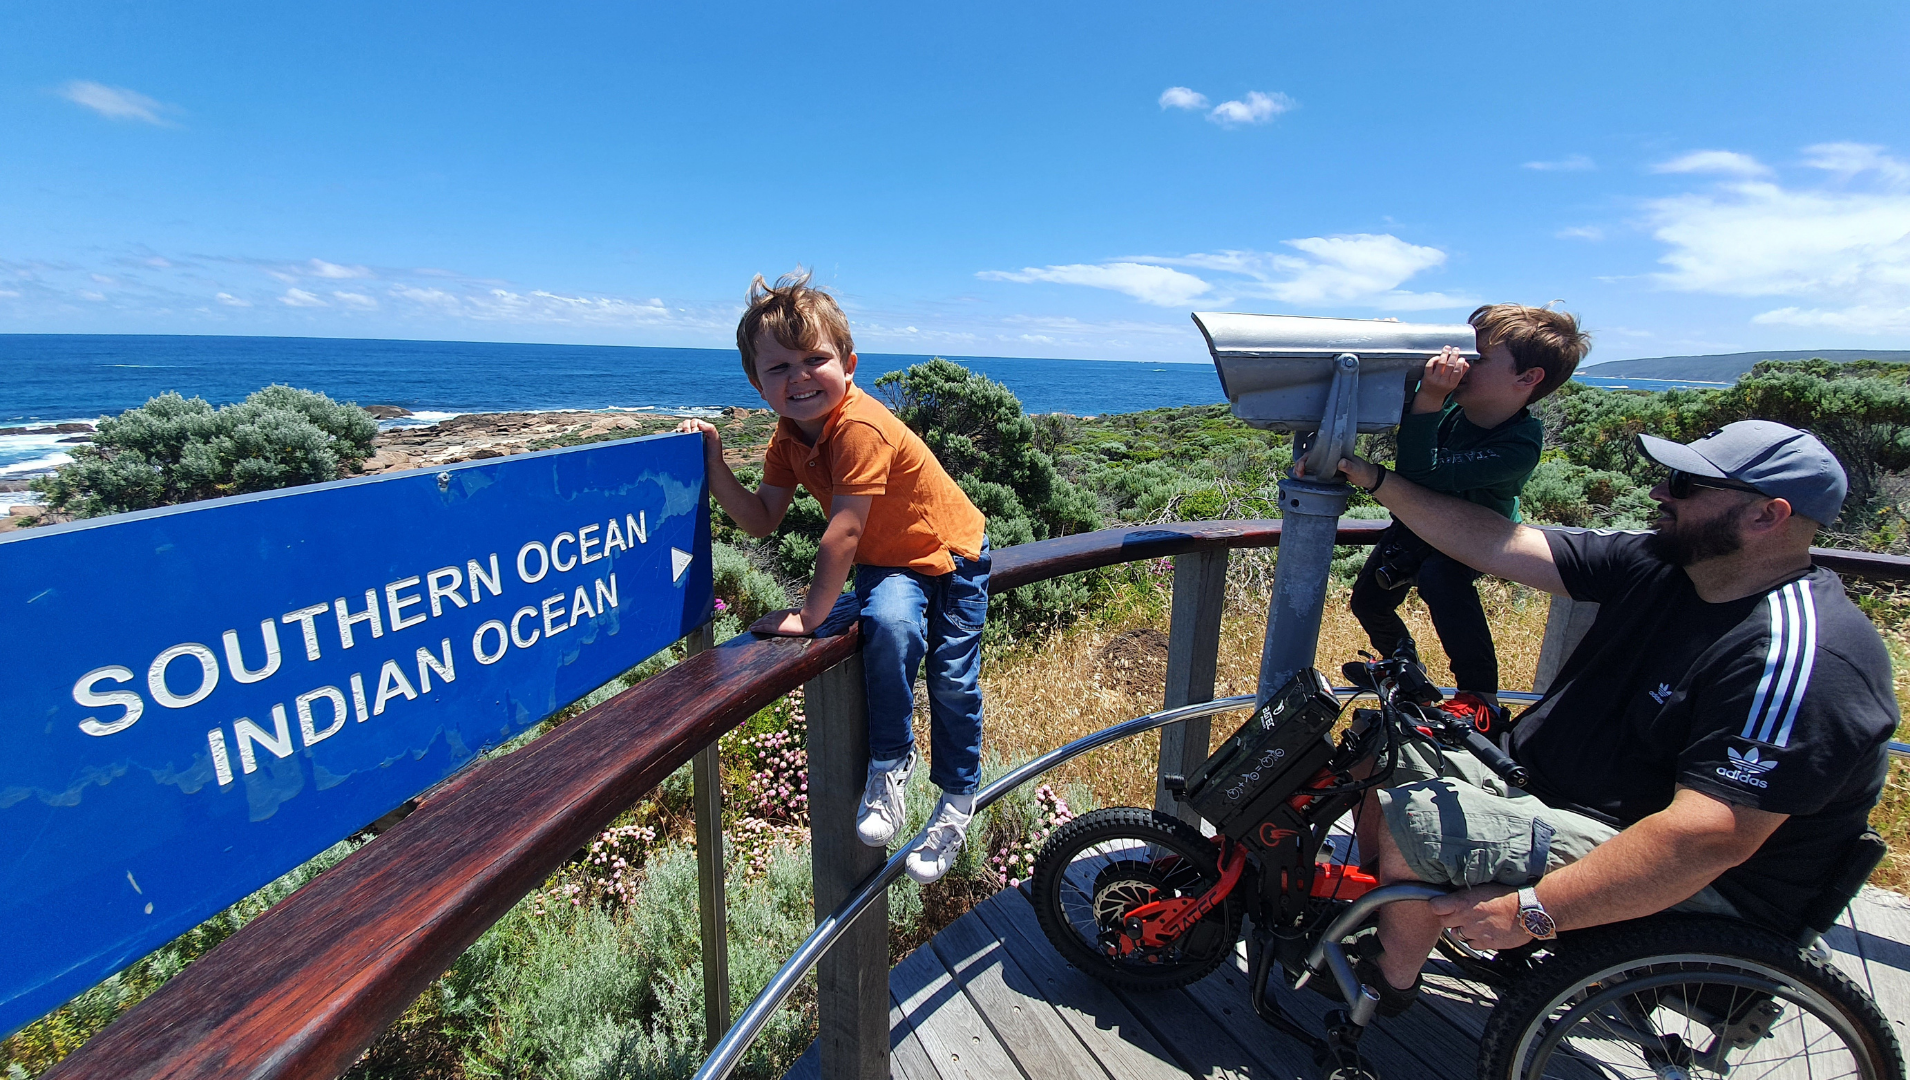 Andrew Hartshorn pictured with his two sons at a beach lookout point in Cape Leeuwin